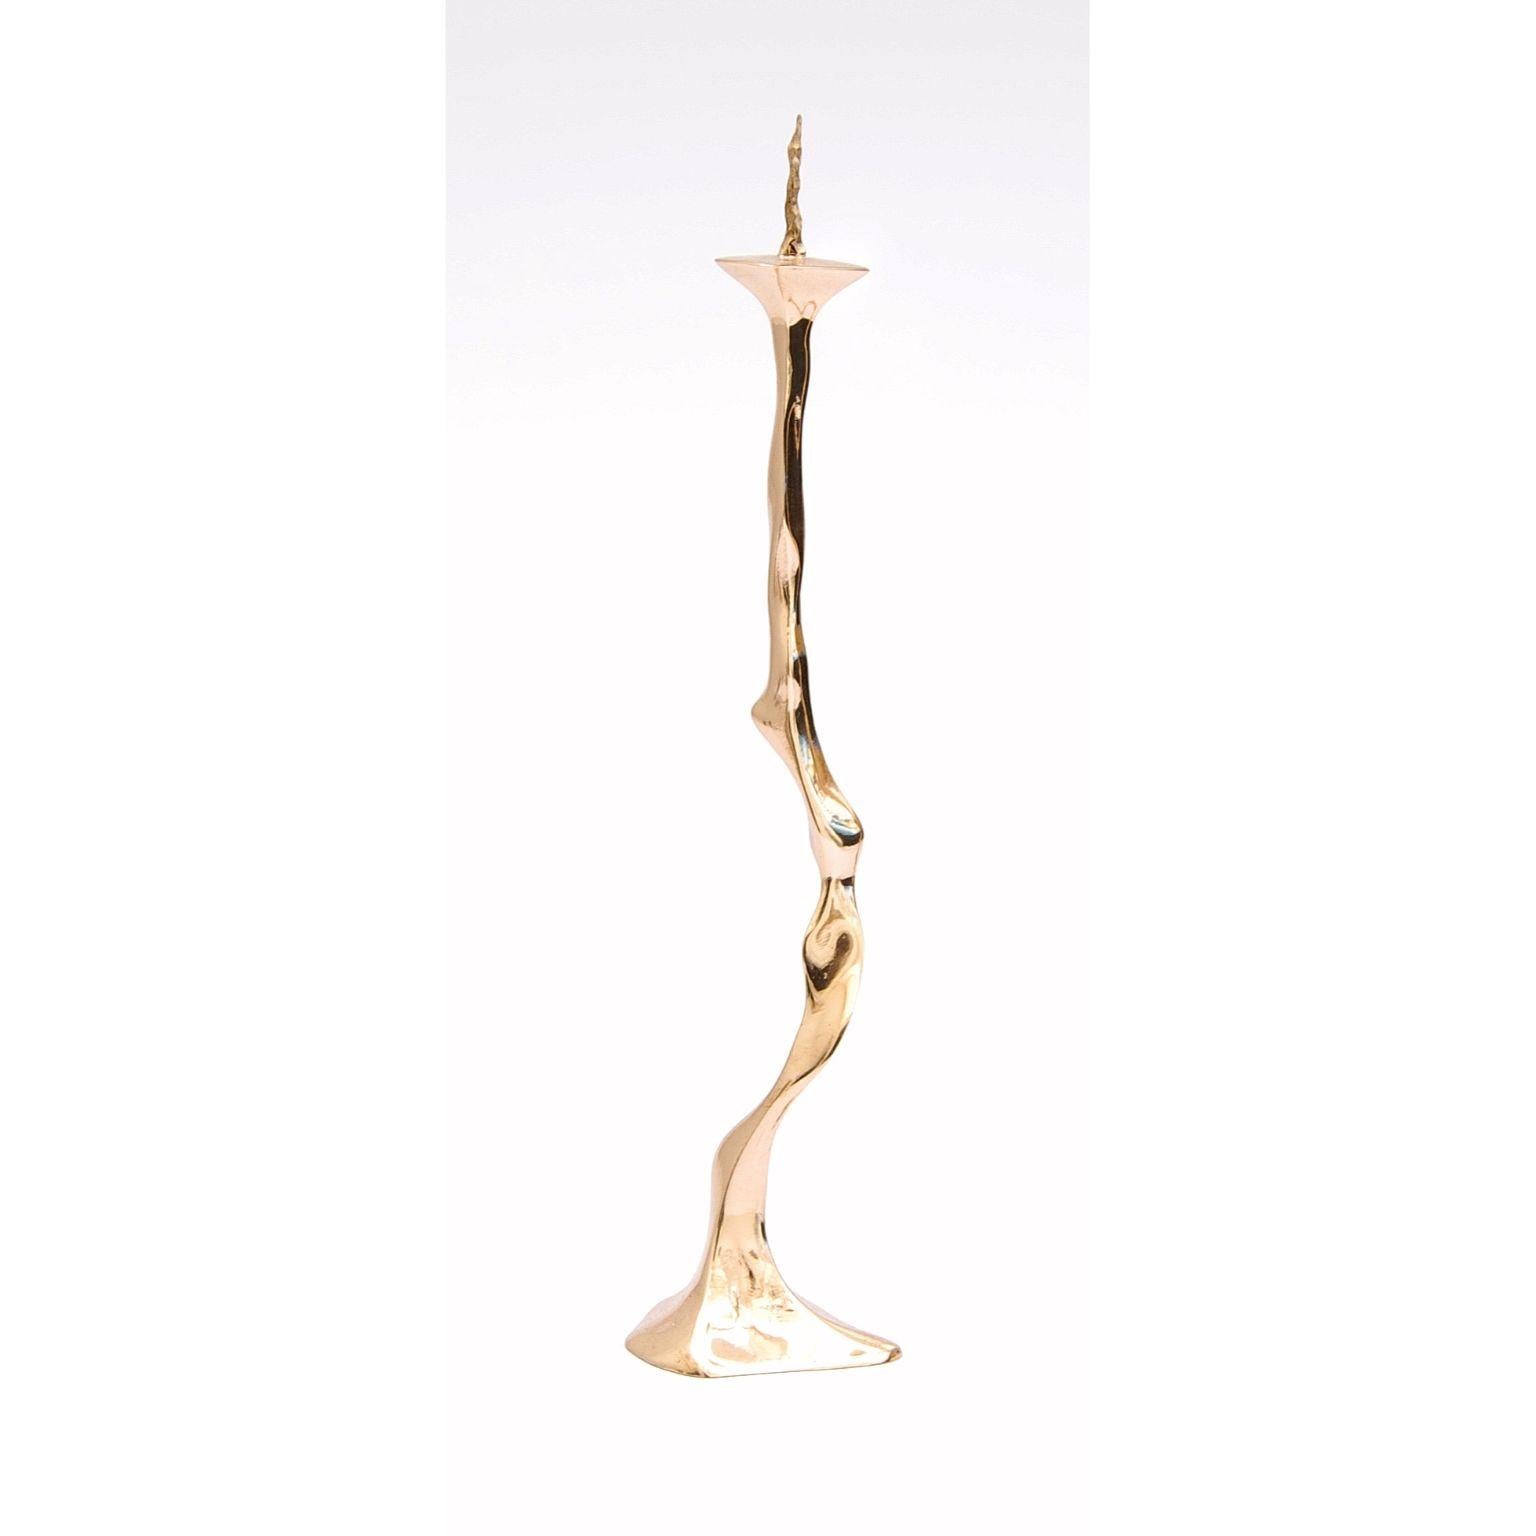 Debbie candlestick by Fakasaka Design
Dimensions: W 6 cm D 5 cm H 24 cm each.
Materials: polished bronze.

 FAKASAKA is a design company focused on production of high-end furniture, lighting, decorative objects, jewels, and